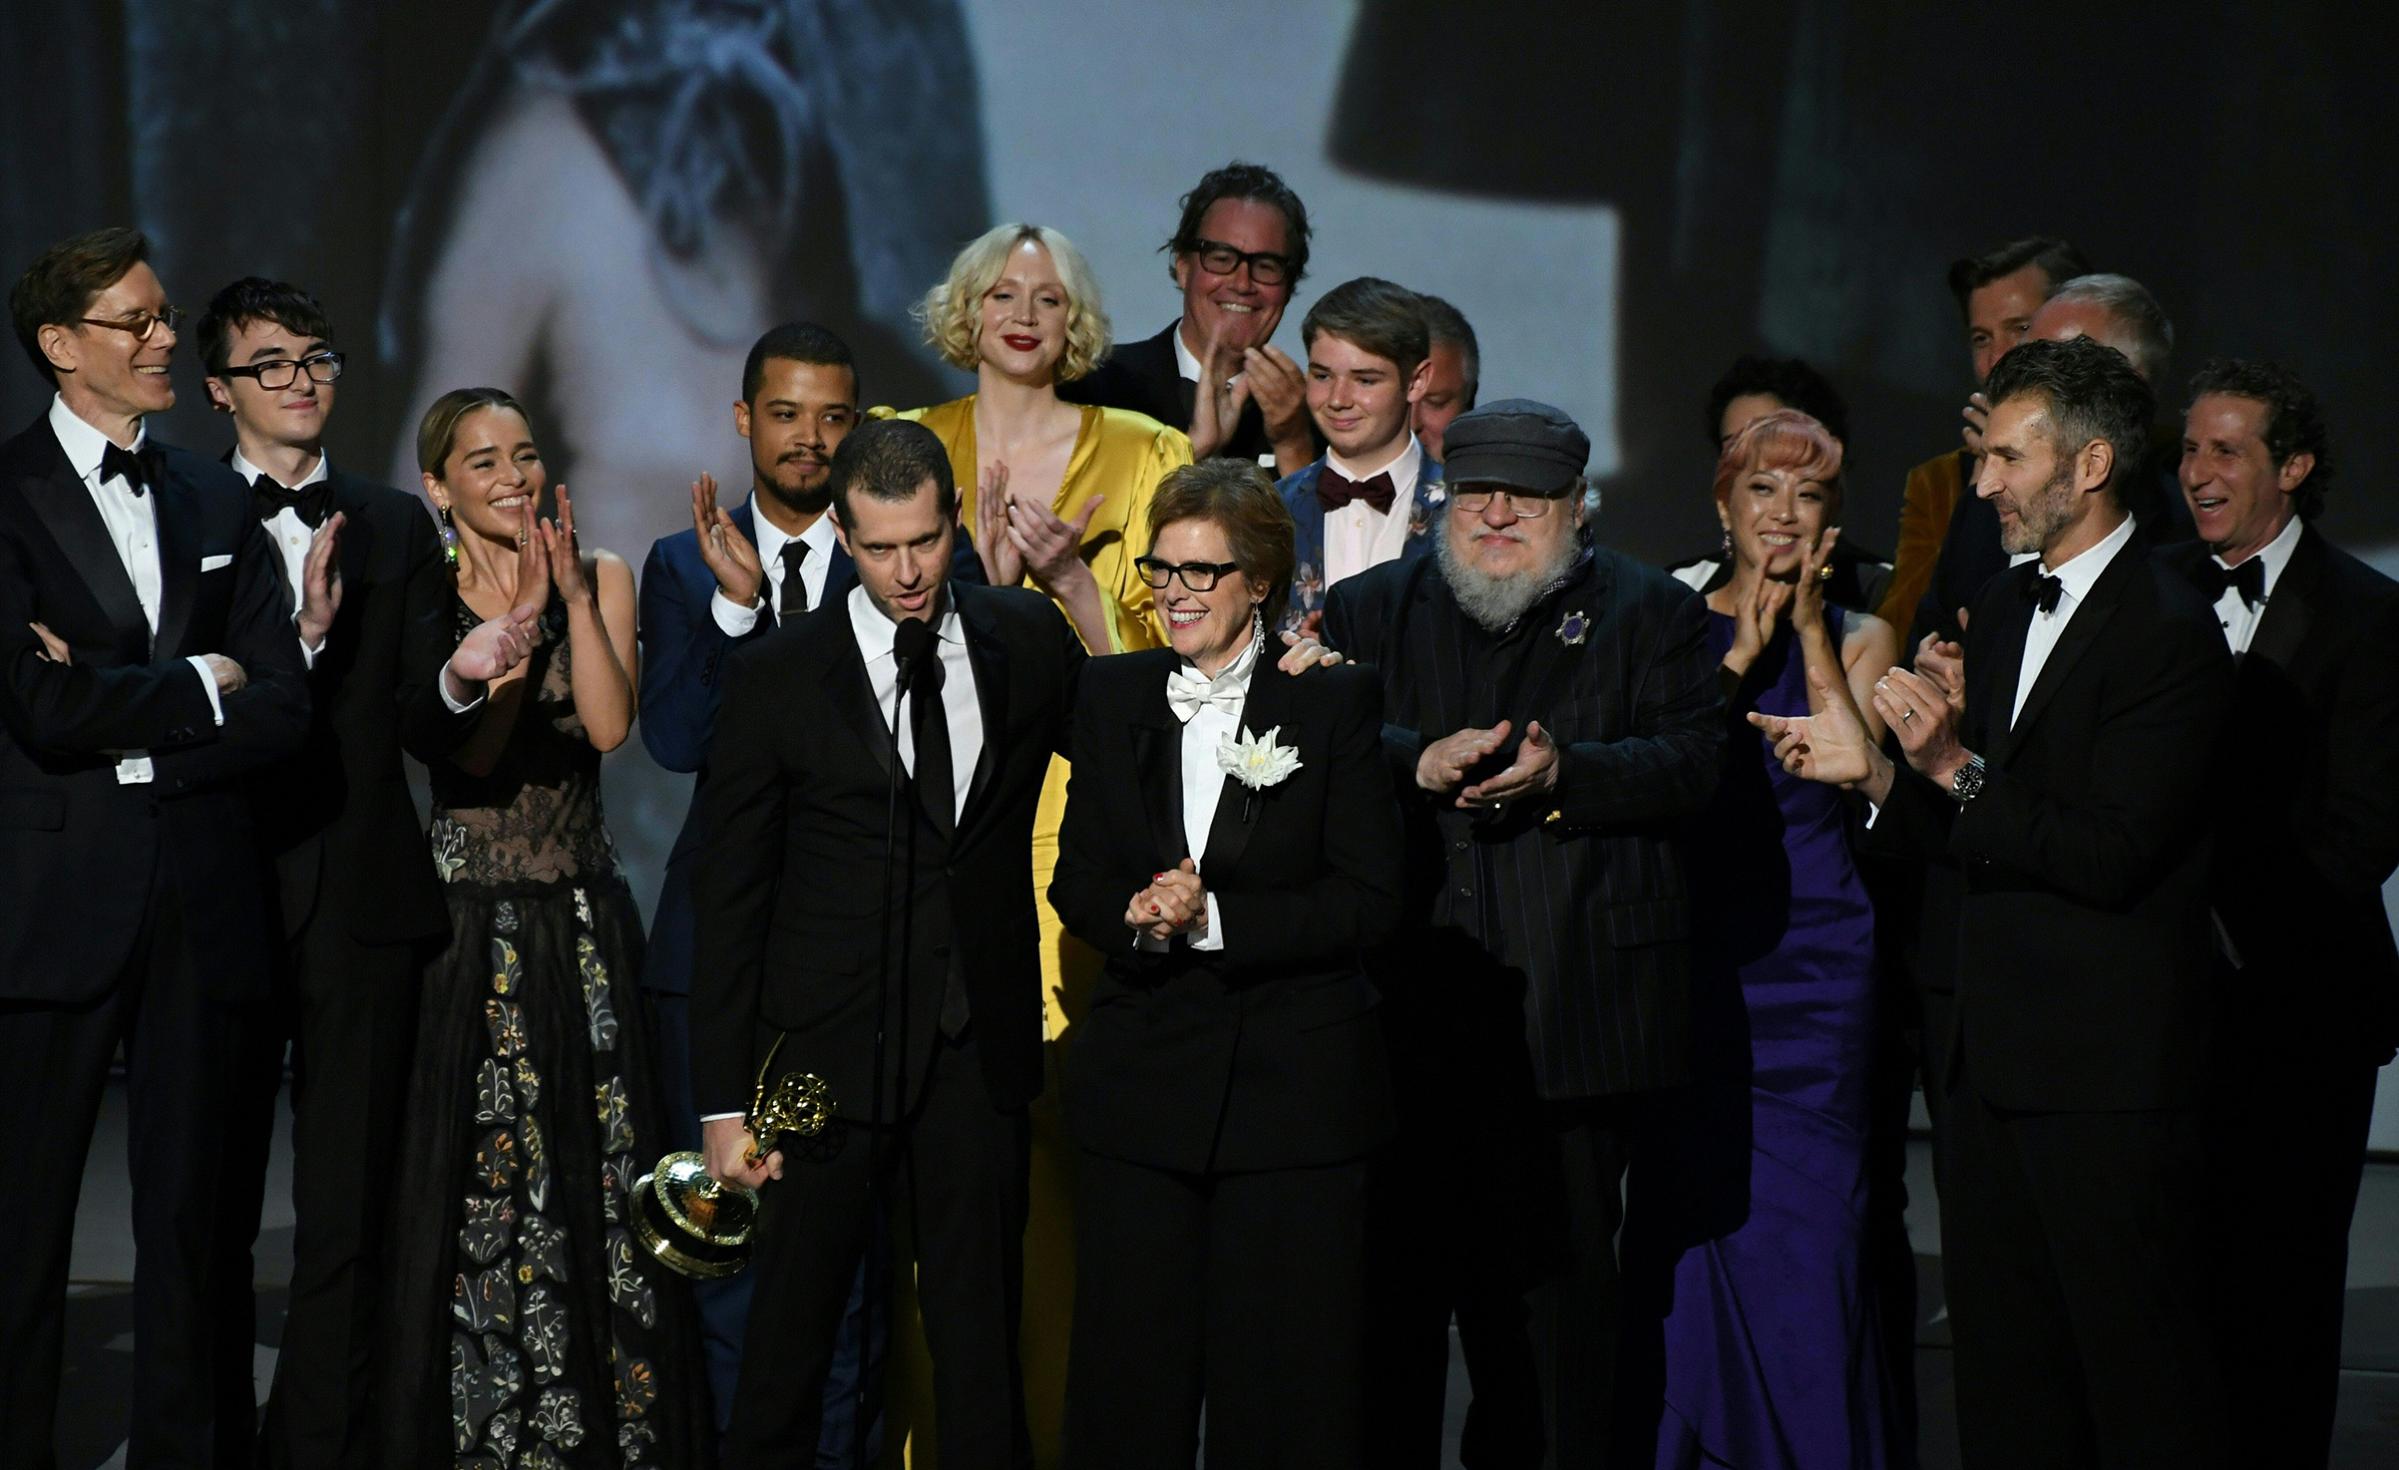 Writer-producer D.B. Weiss and the cast of "Game of Thrones" accept the award Outstanding Drama series onstage during the 70th Emmy Awards at the Microsoft Theatre in Los Angeles on Sept. 17, 2018.